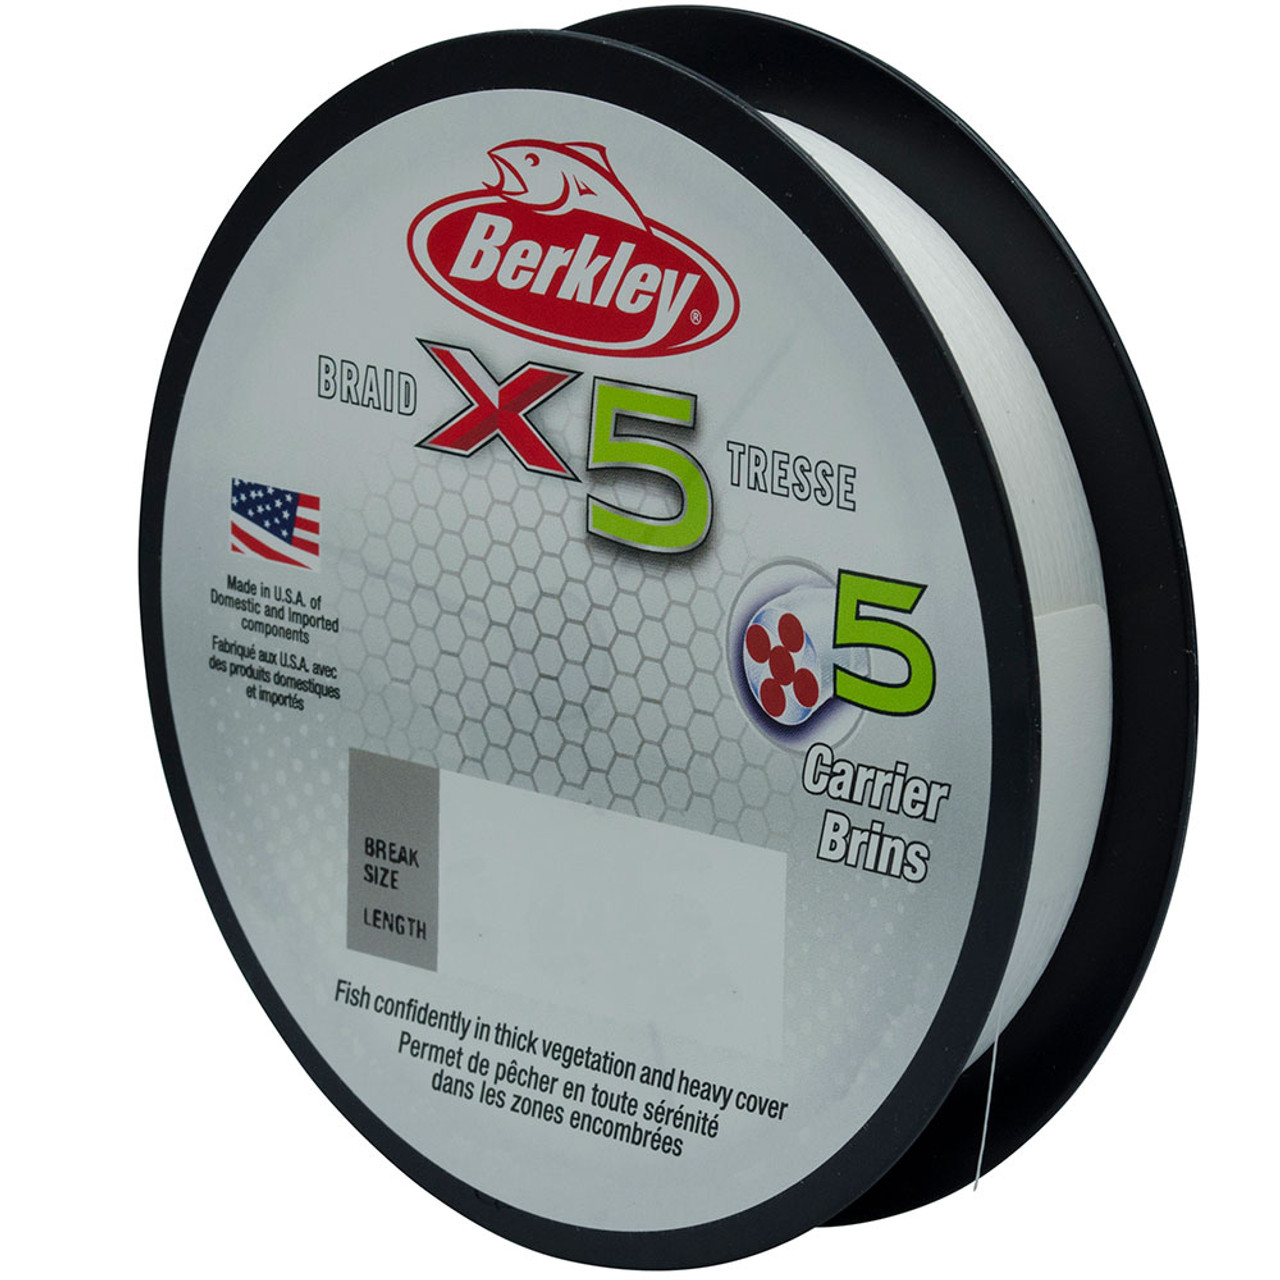 Berkley x5 Braid Superline, Low-Vis Green, 30-Pound Break Strength, 2188yd  Fishing Line, Suitable for Freshwater and Saltwater Environments